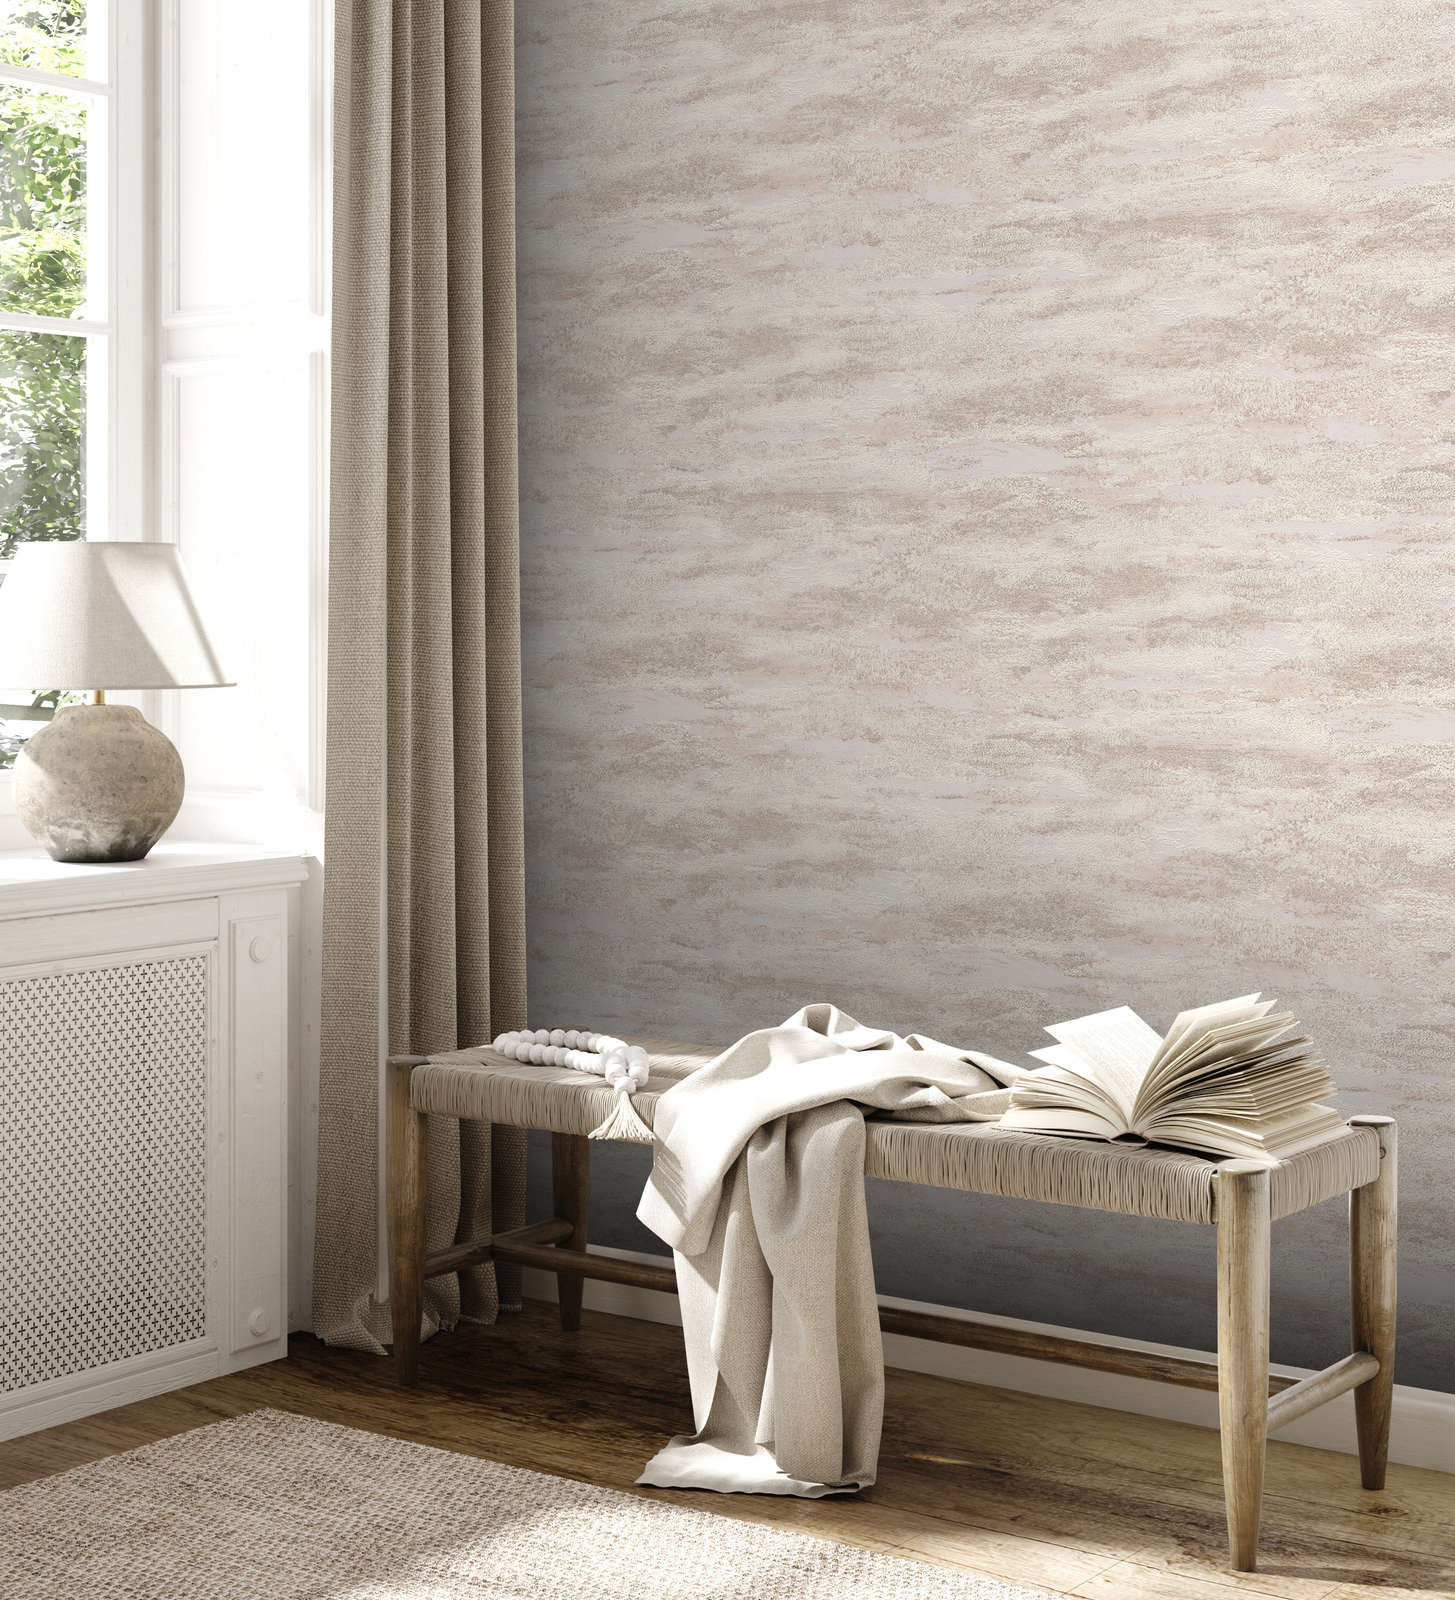             Non-woven wallpaper with light wave pattern & glitter effect - white, beige
        